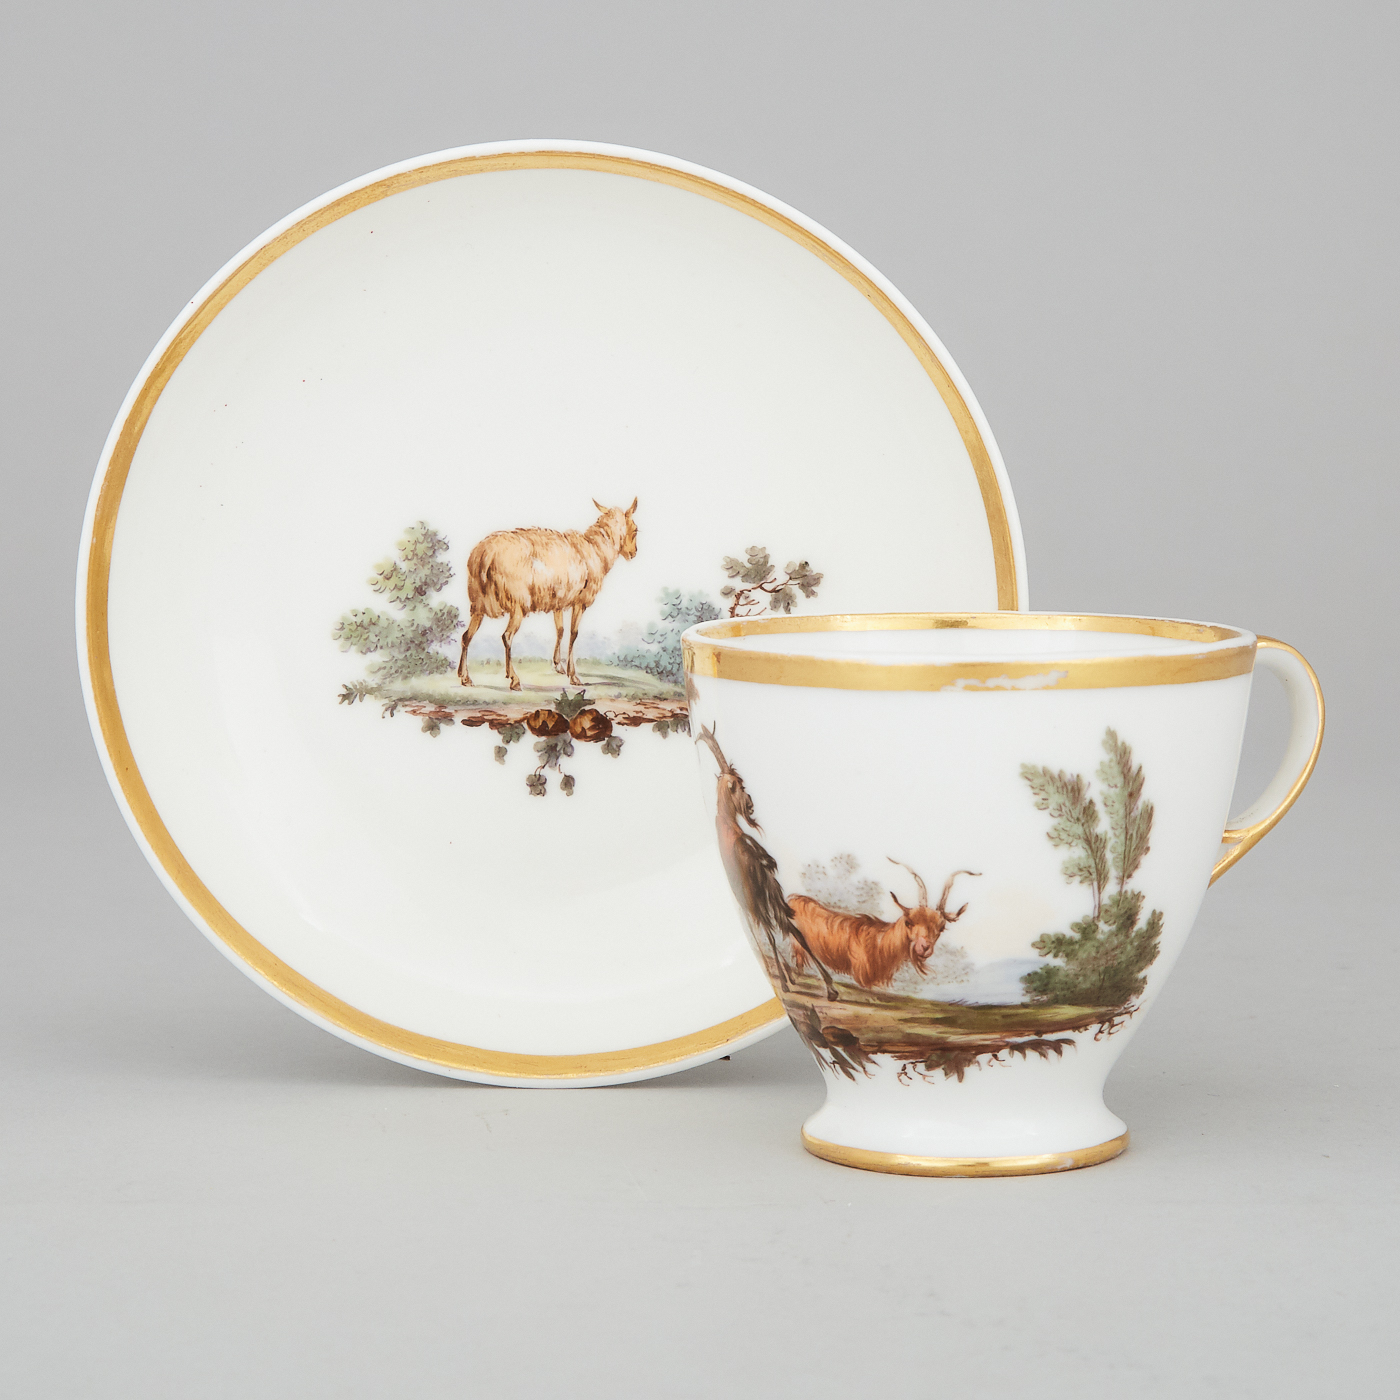 French Porcelain Cup and Saucer, early 19th century